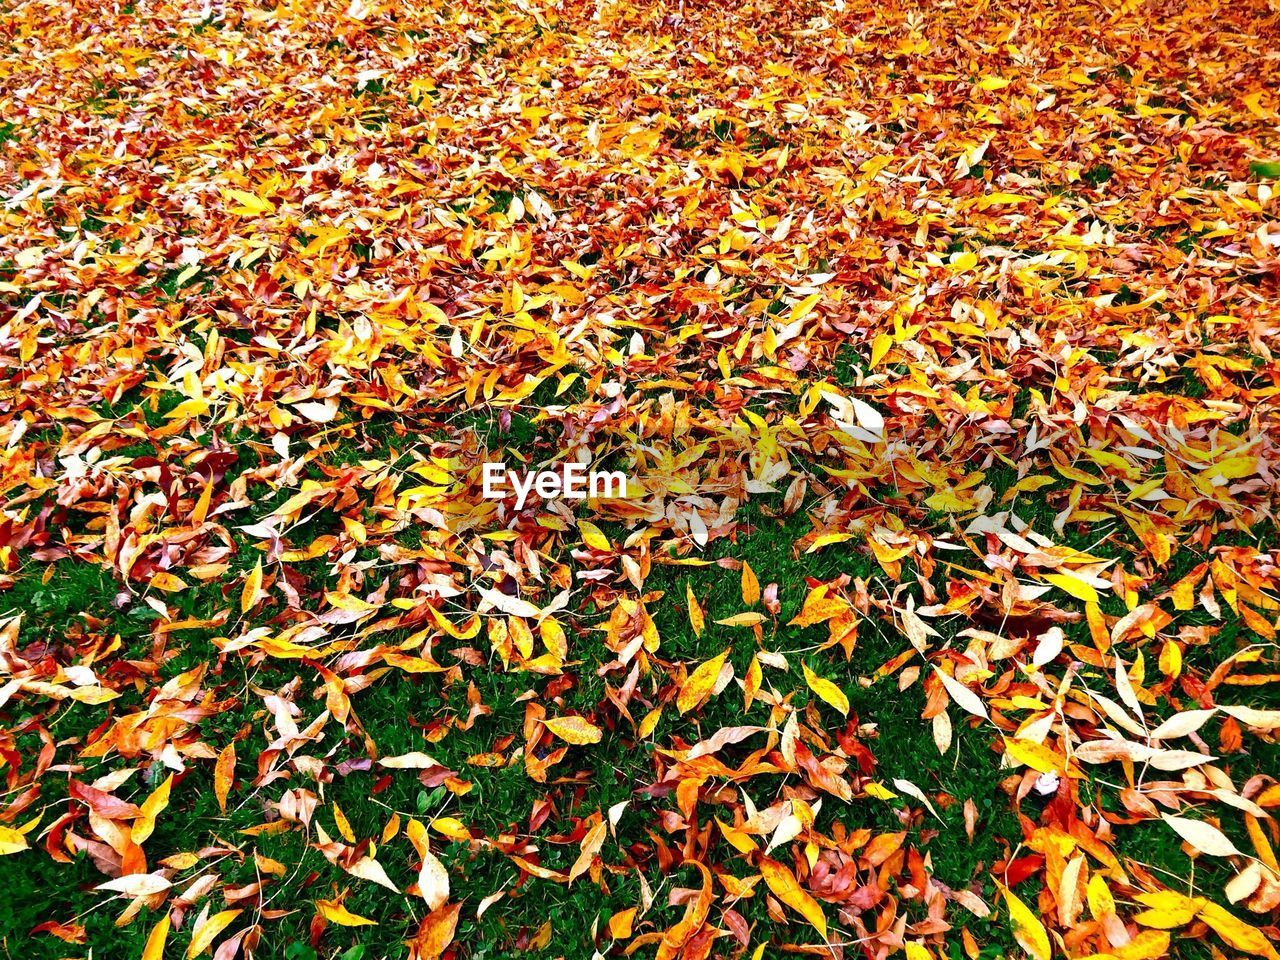 Leaves fallen on ground during autumn